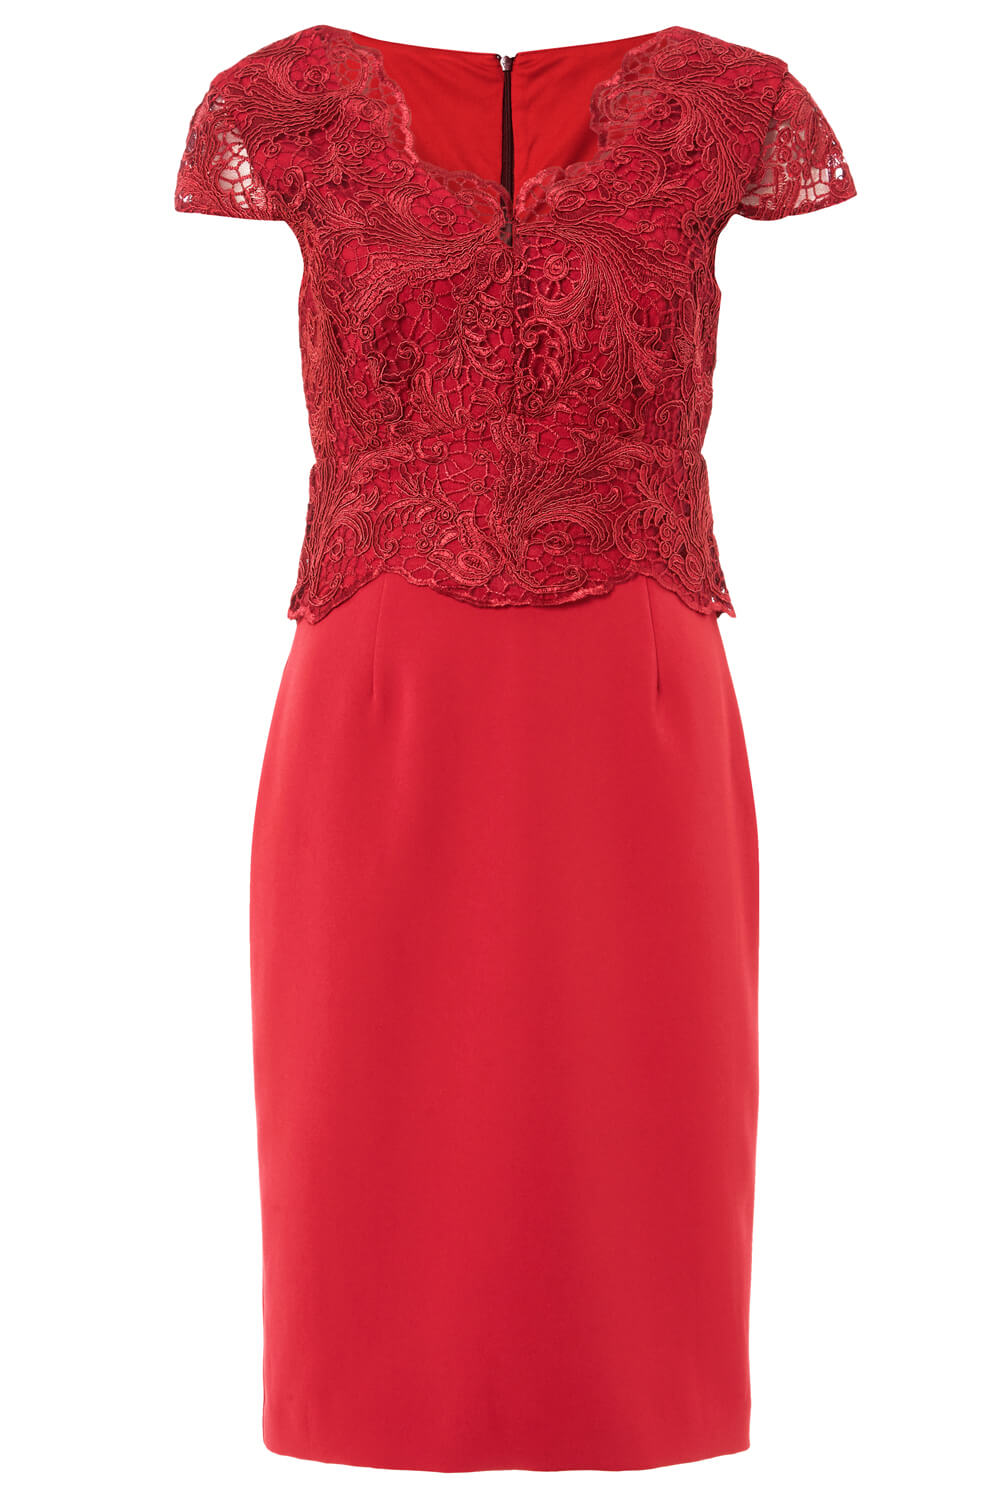 Burgundy Lace Overlay Fitted Dress, Image 6 of 6